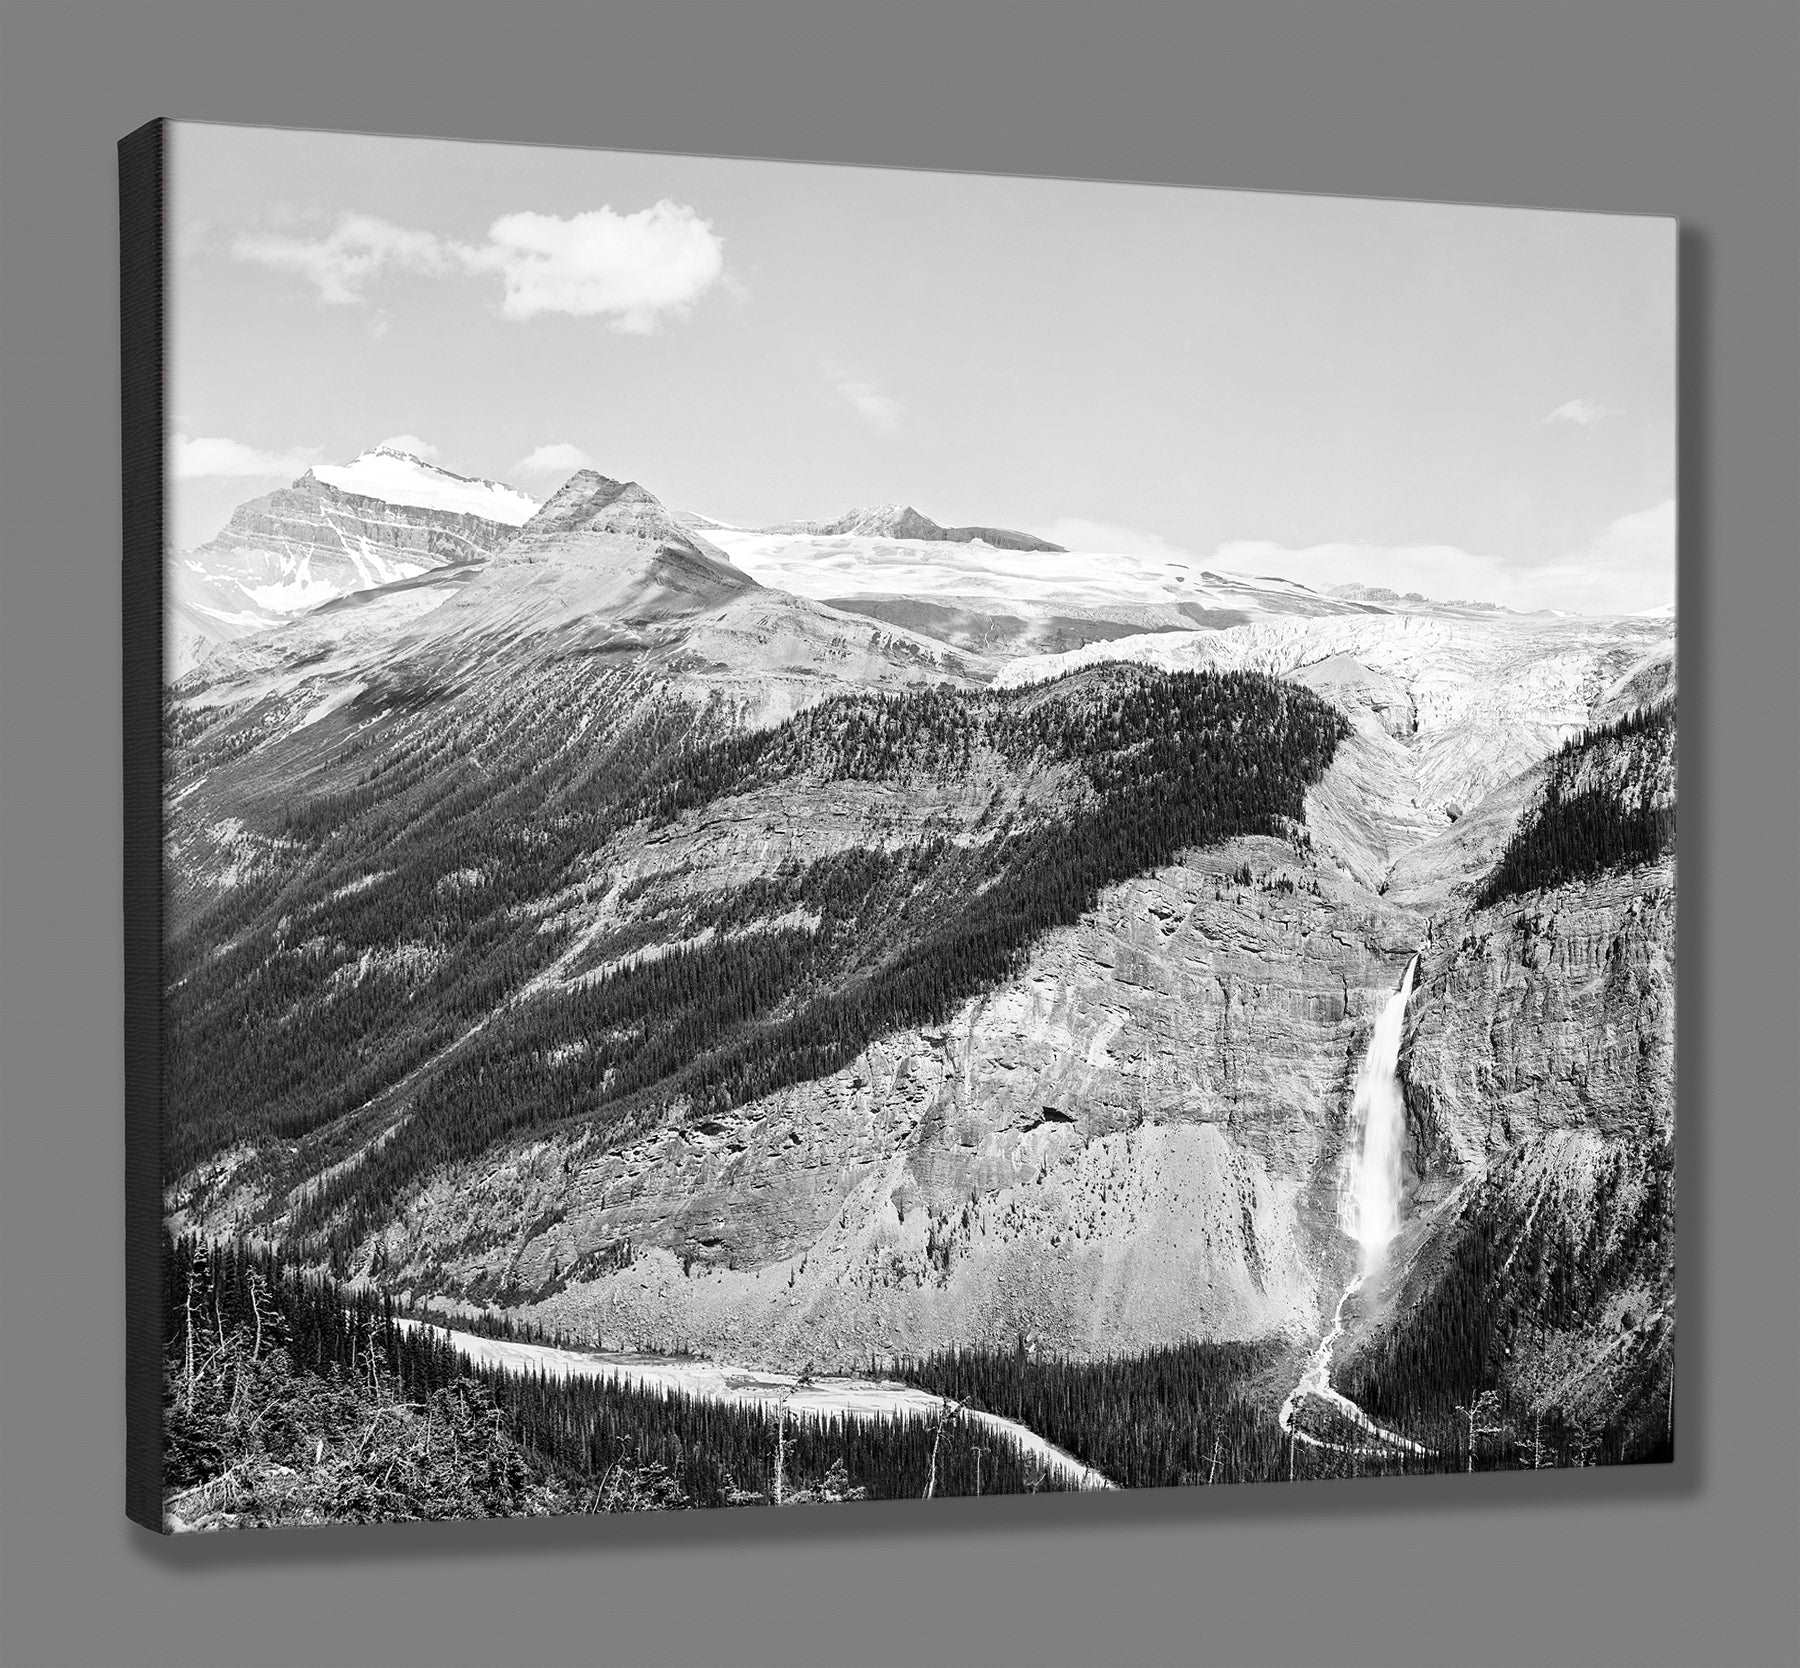 A digital mockup of a canvas print reproduction, featuring vintage photo of Yoho Valley